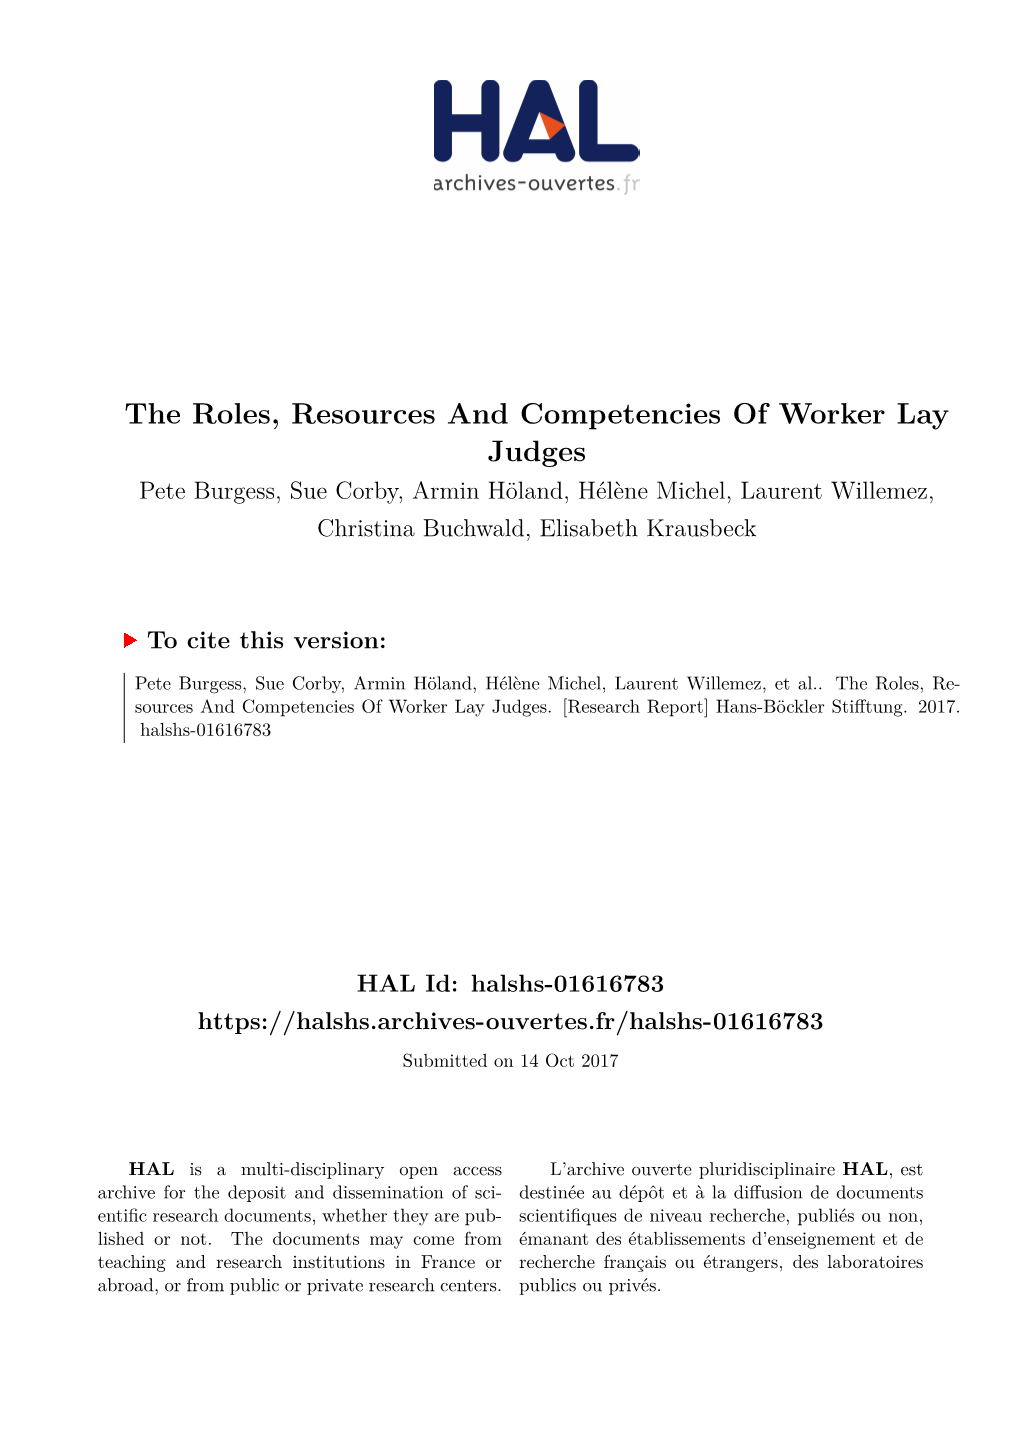 The Roles, Resources and Competencies of Worker Lay Judges